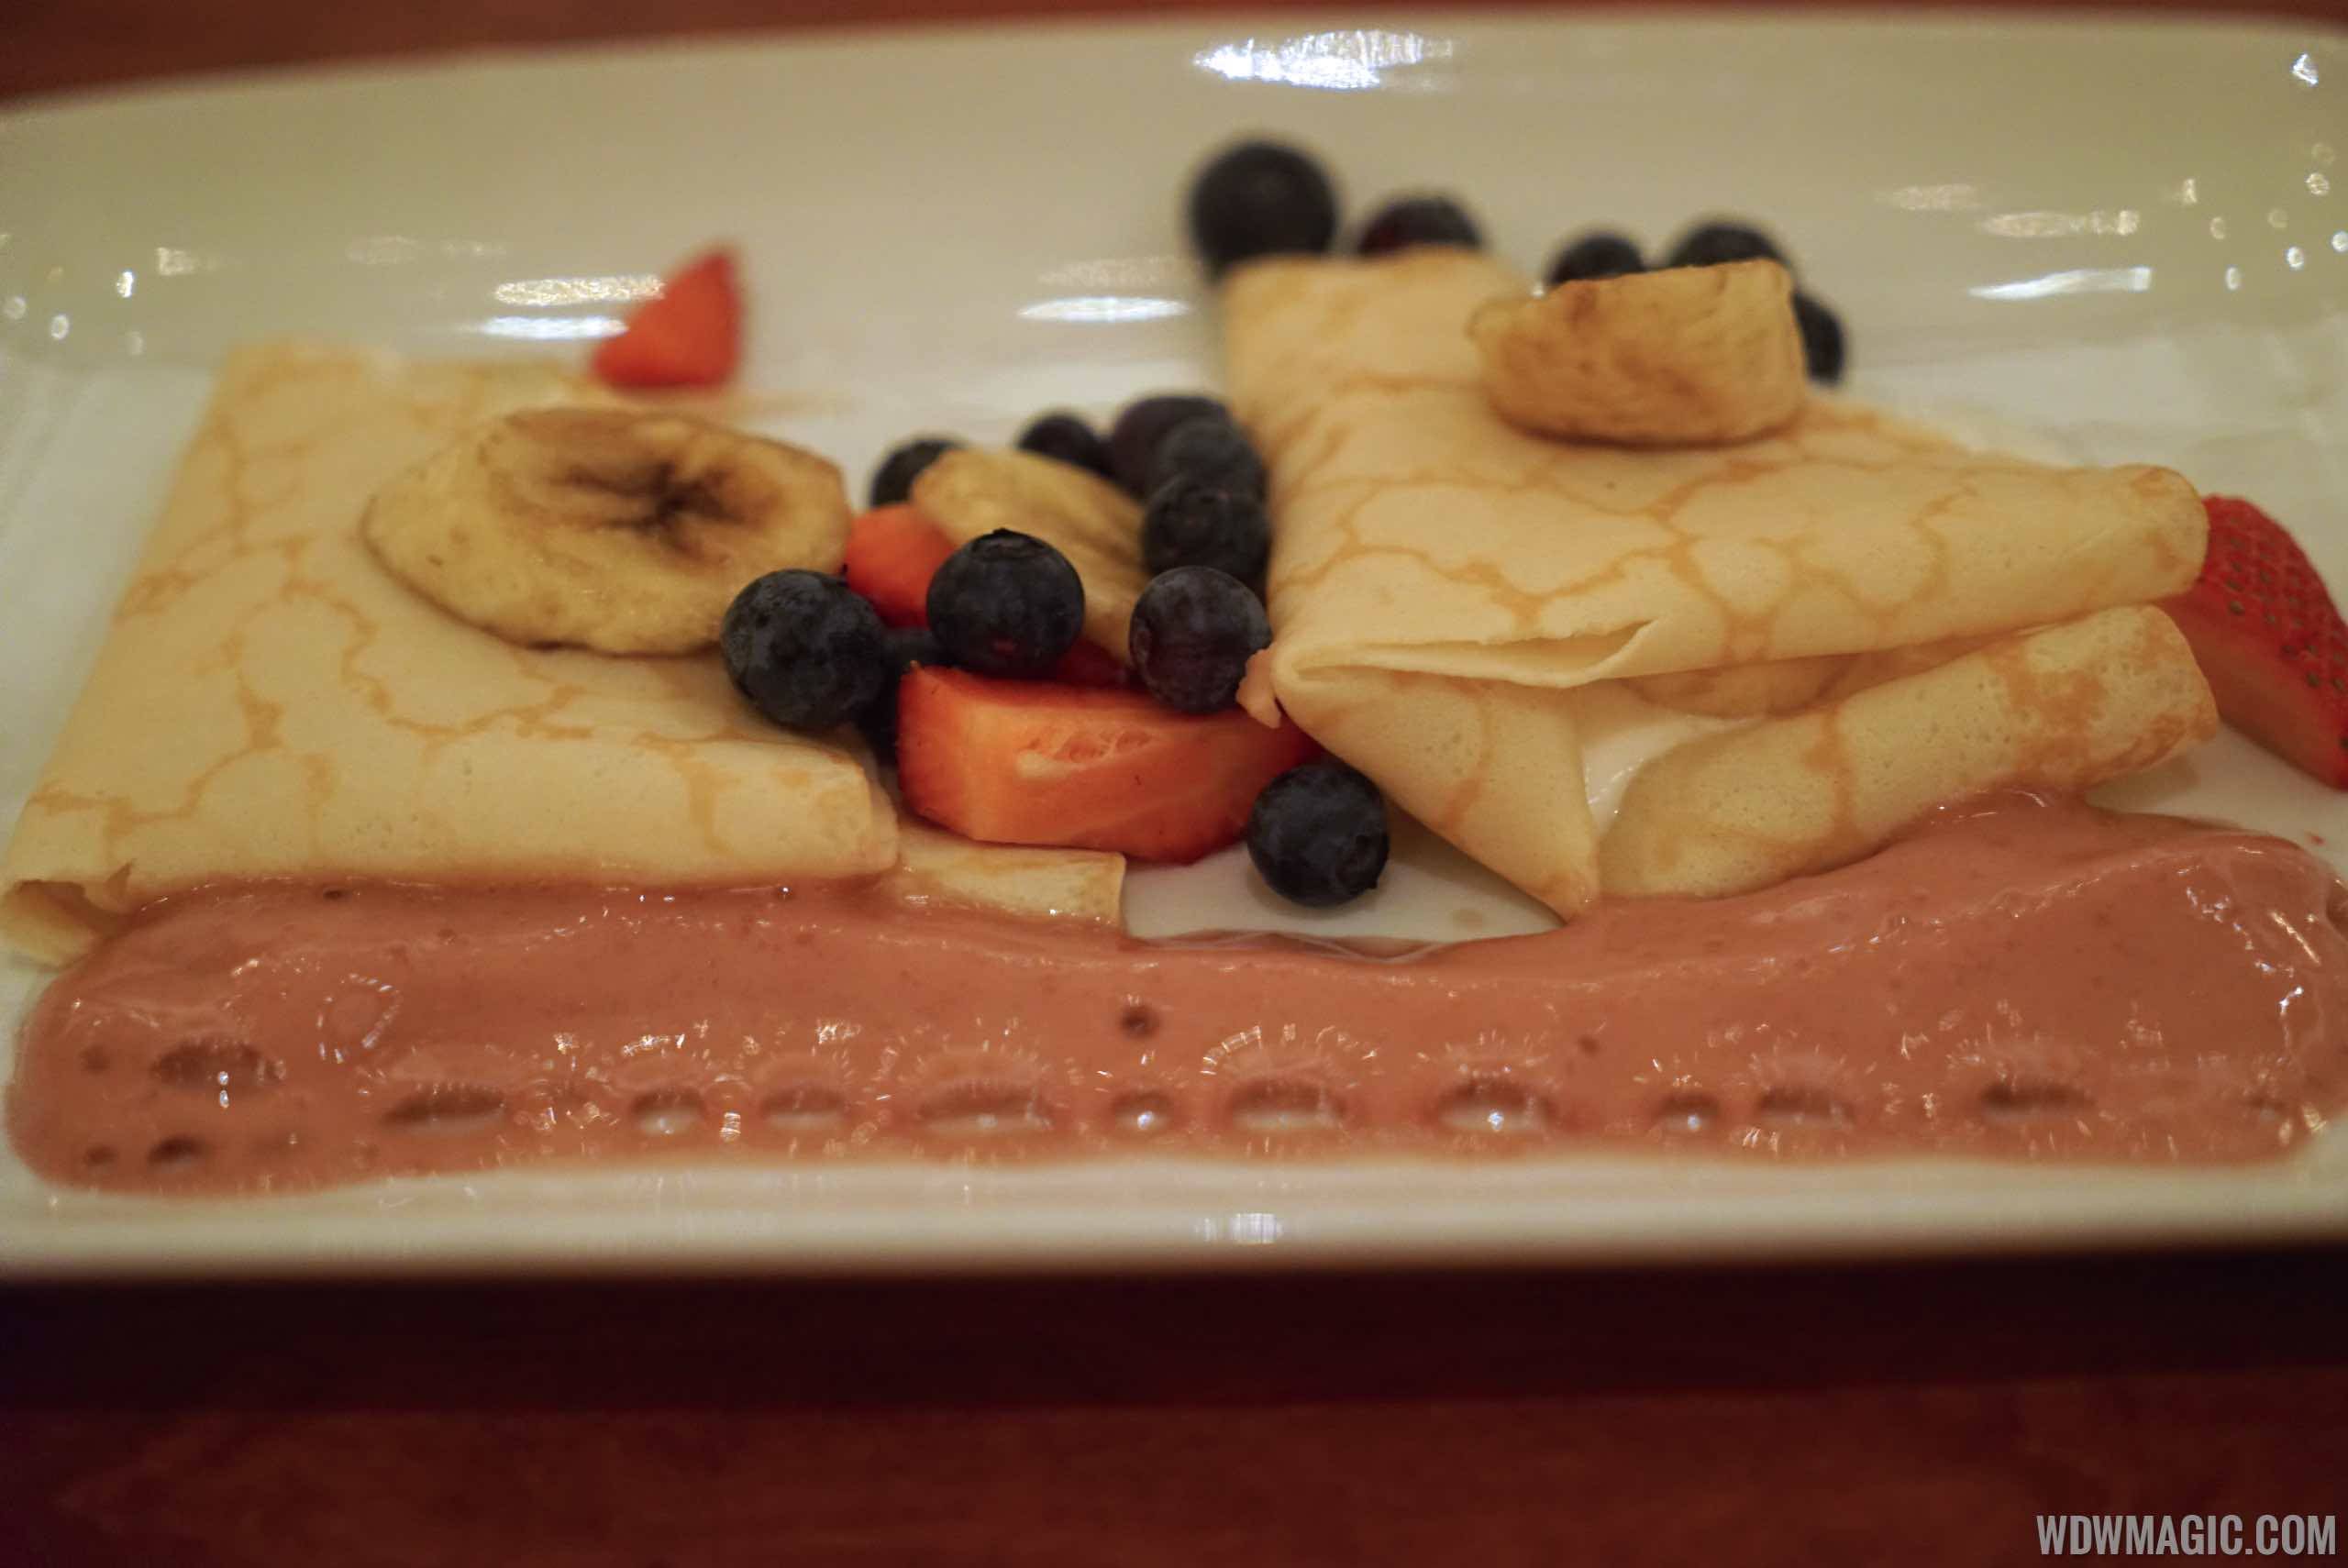 Be Our Guest Restaurant Breakfast - Crepes